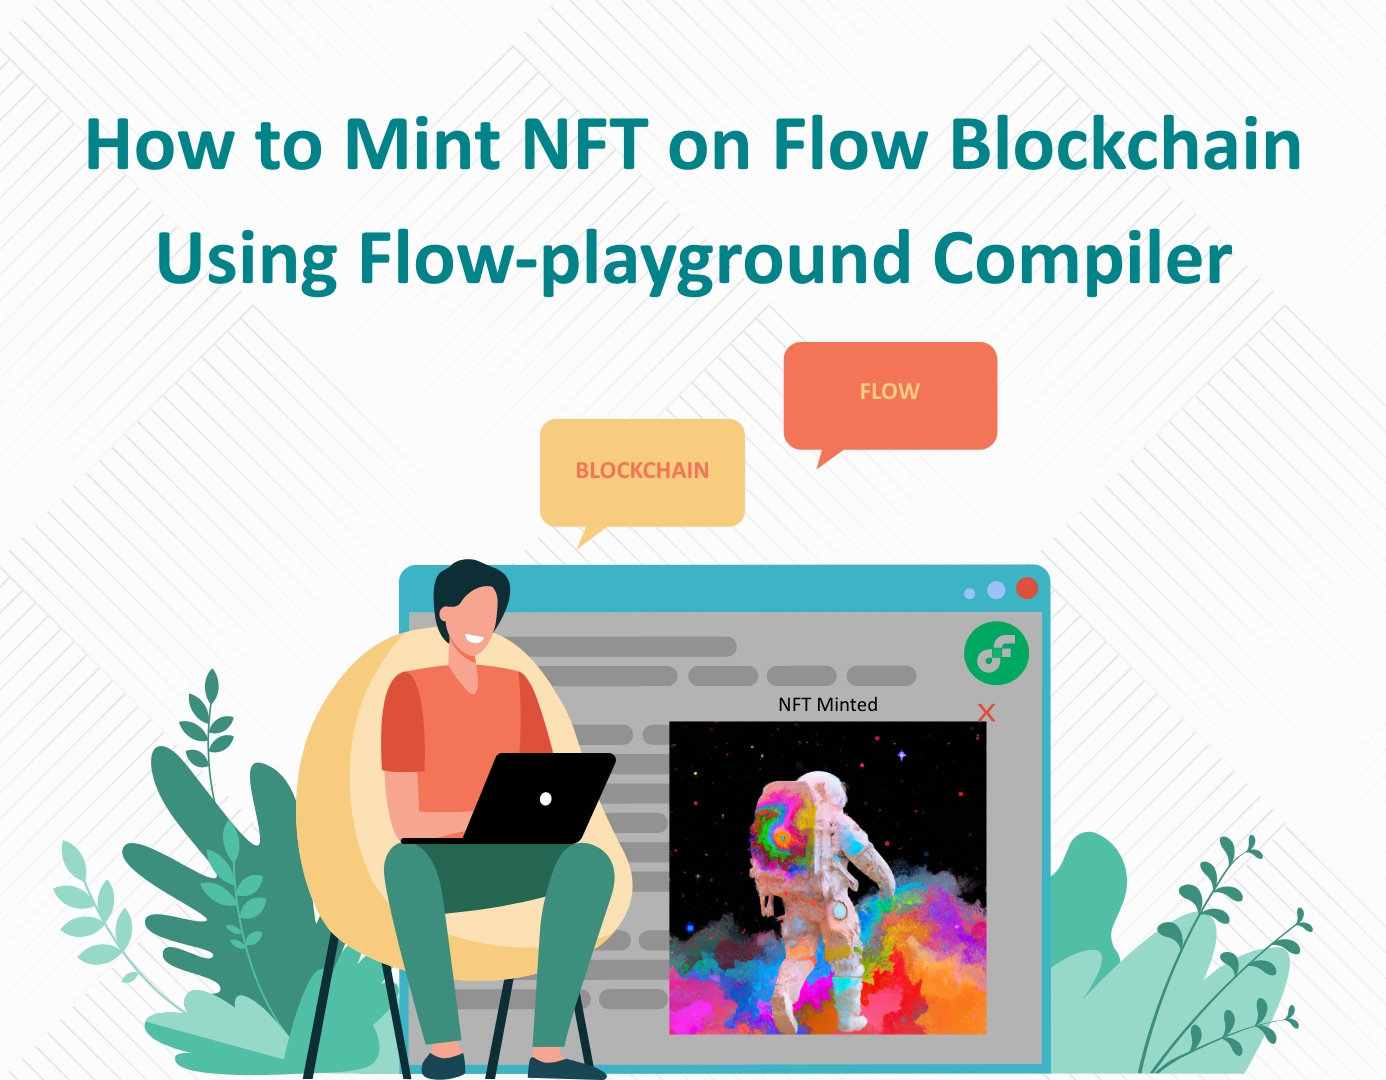 Step-by-step guide on minting NFTs on Flow Blockchain using Flow Playground compiler.